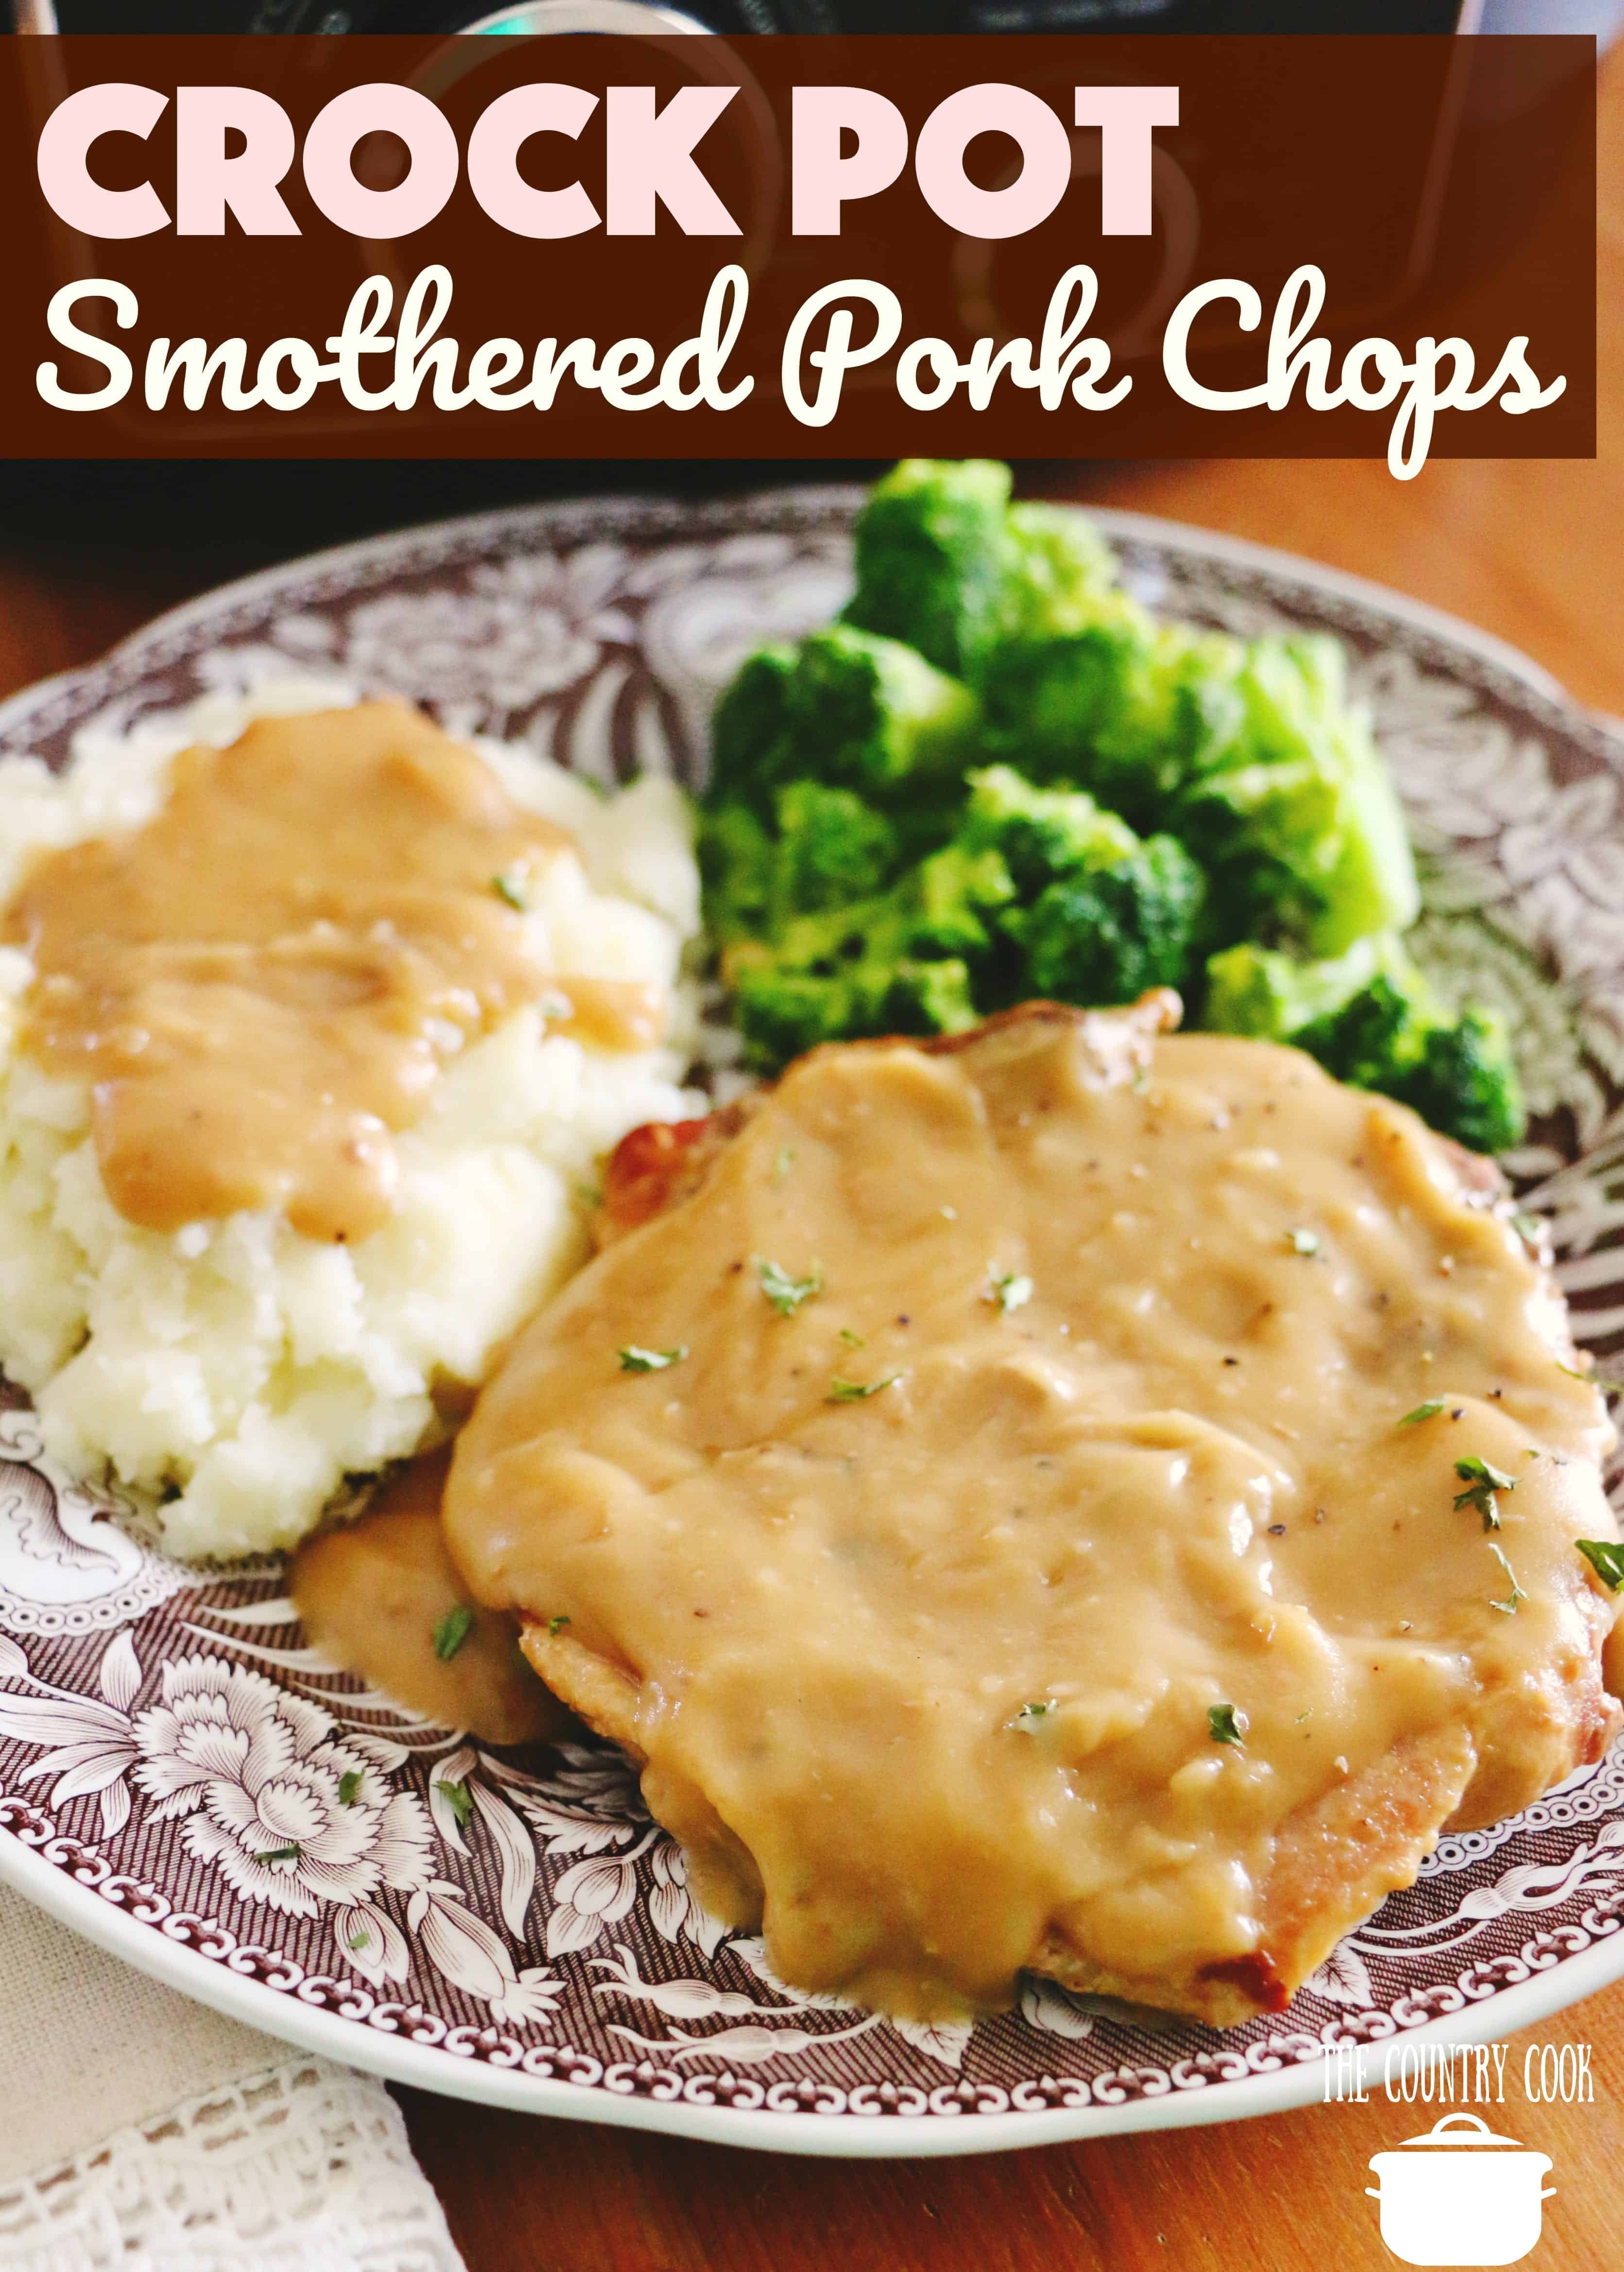 Crock Pot Smothered Pork Chops recipe from The Country Cook